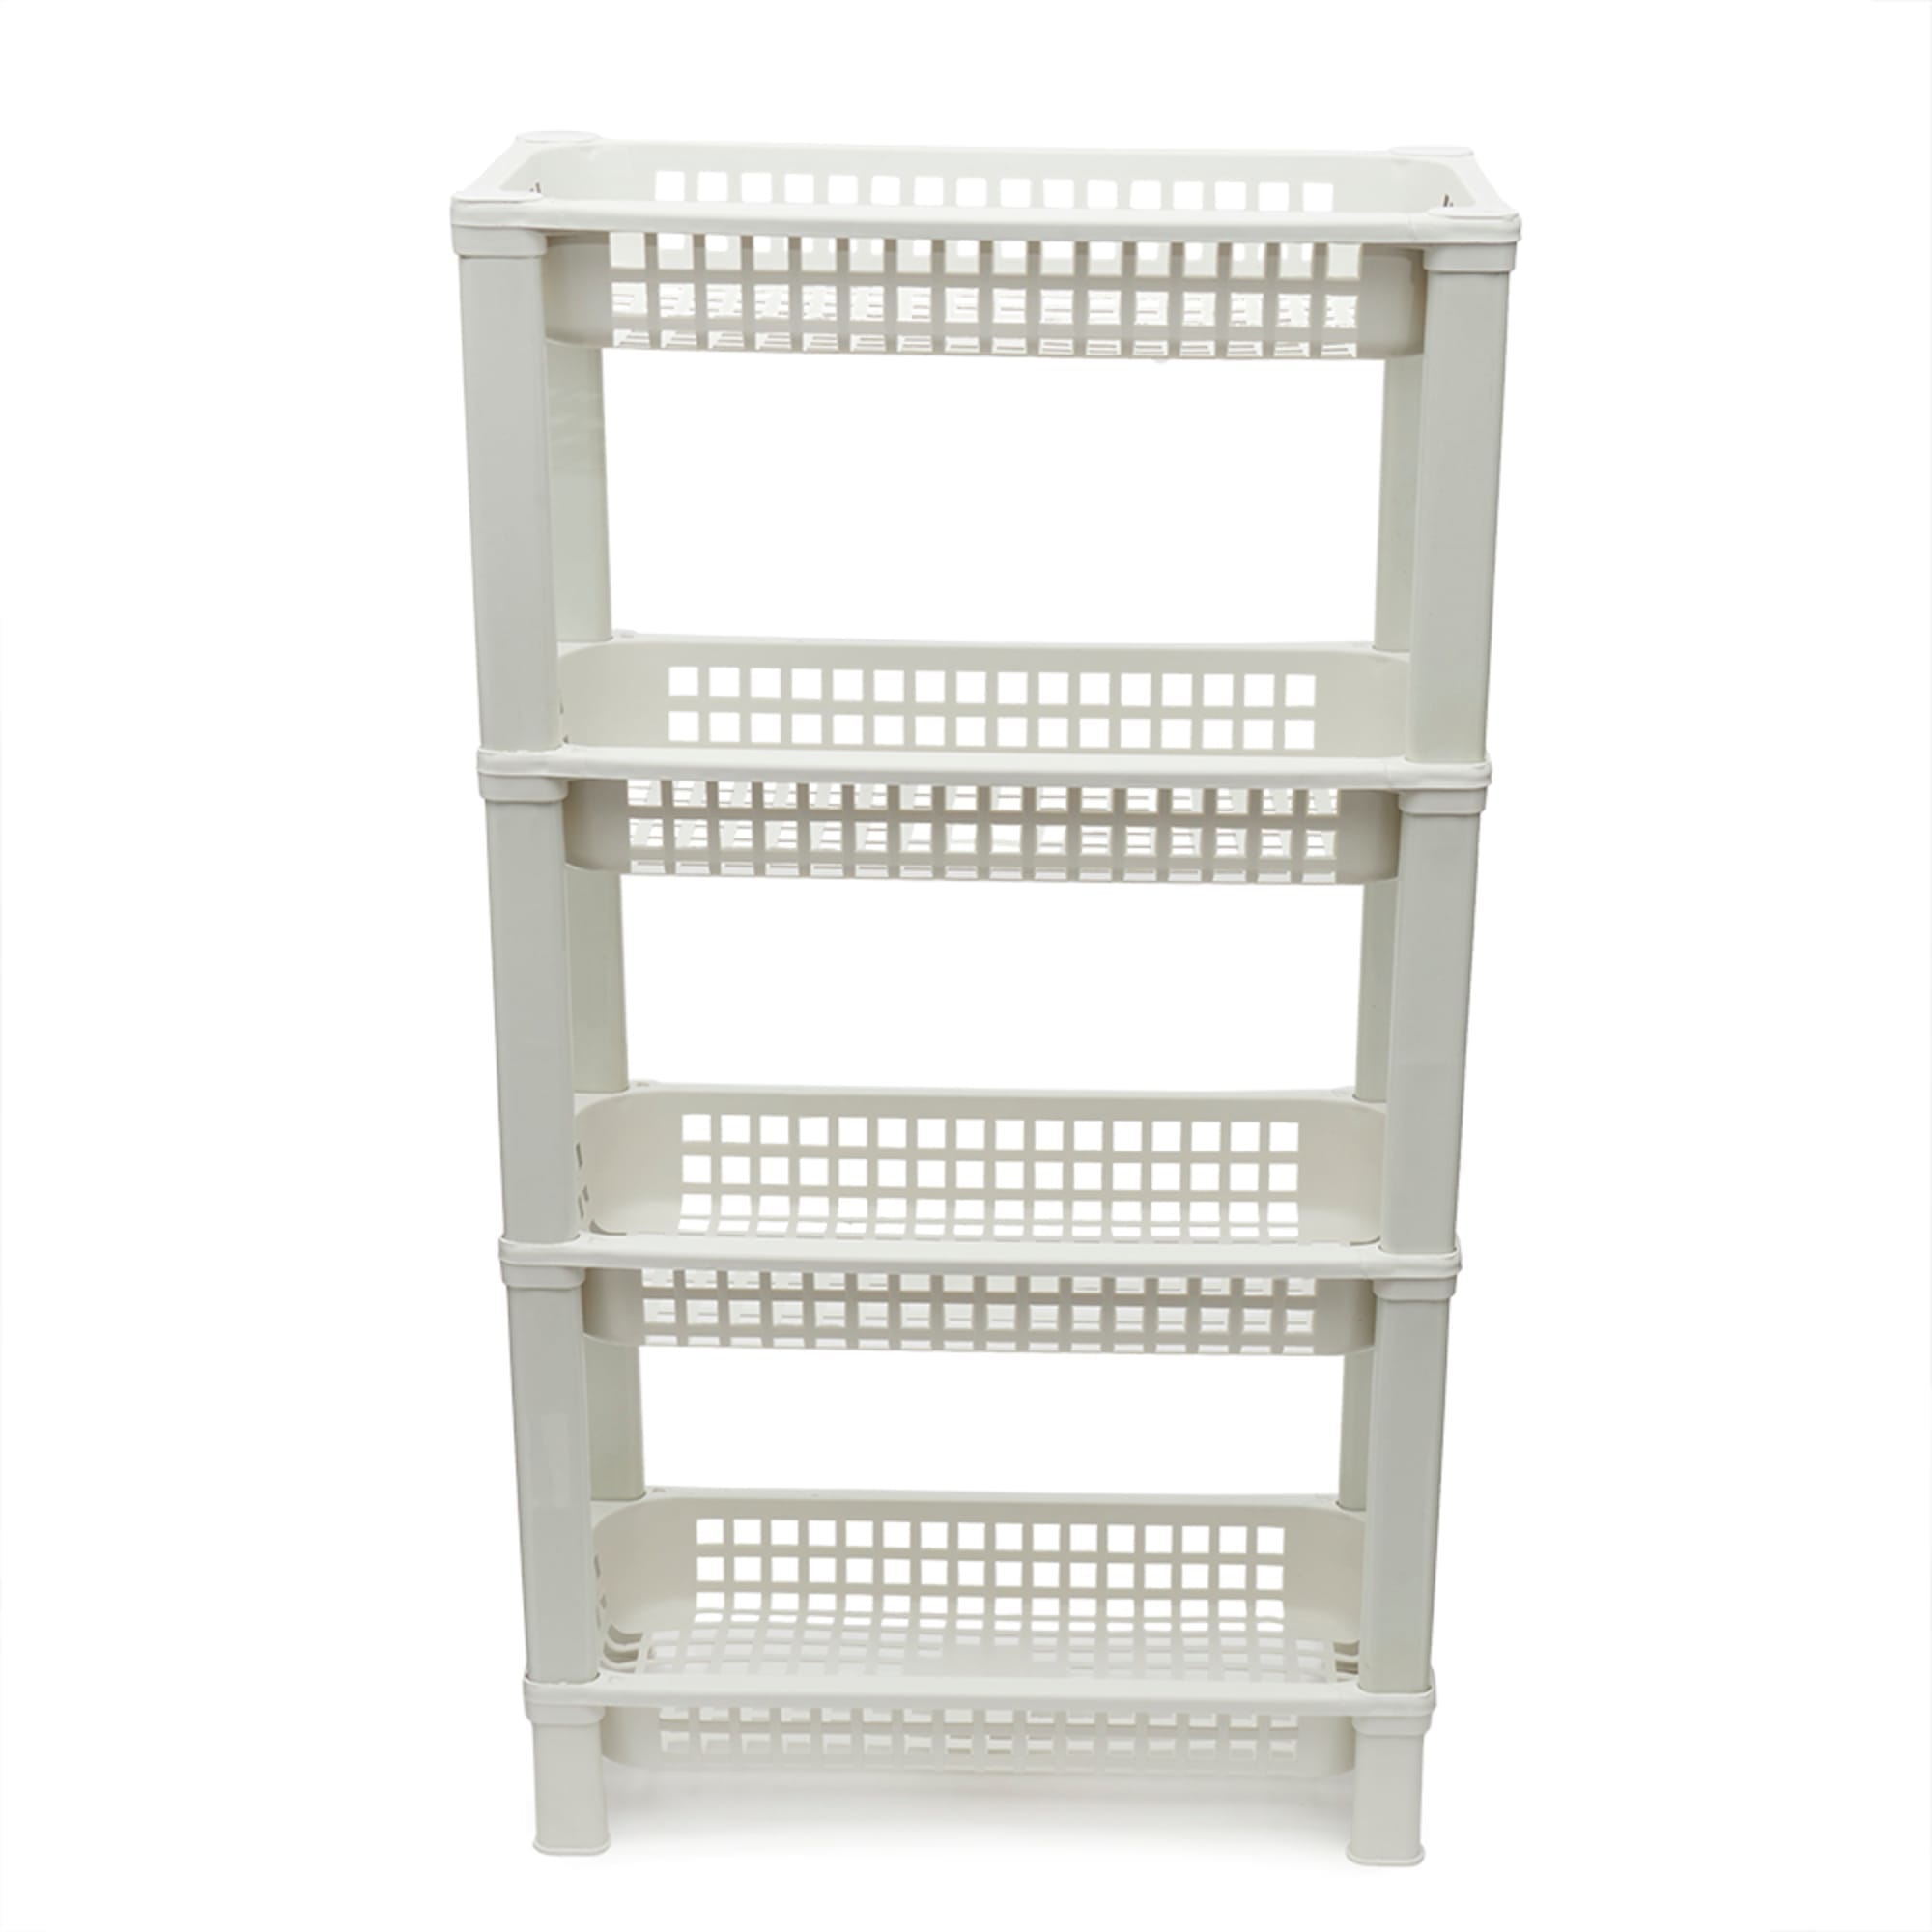 Home Basics 4-Tier Plastic Standing Baskets, White  $8.00 EACH, CASE PACK OF 10